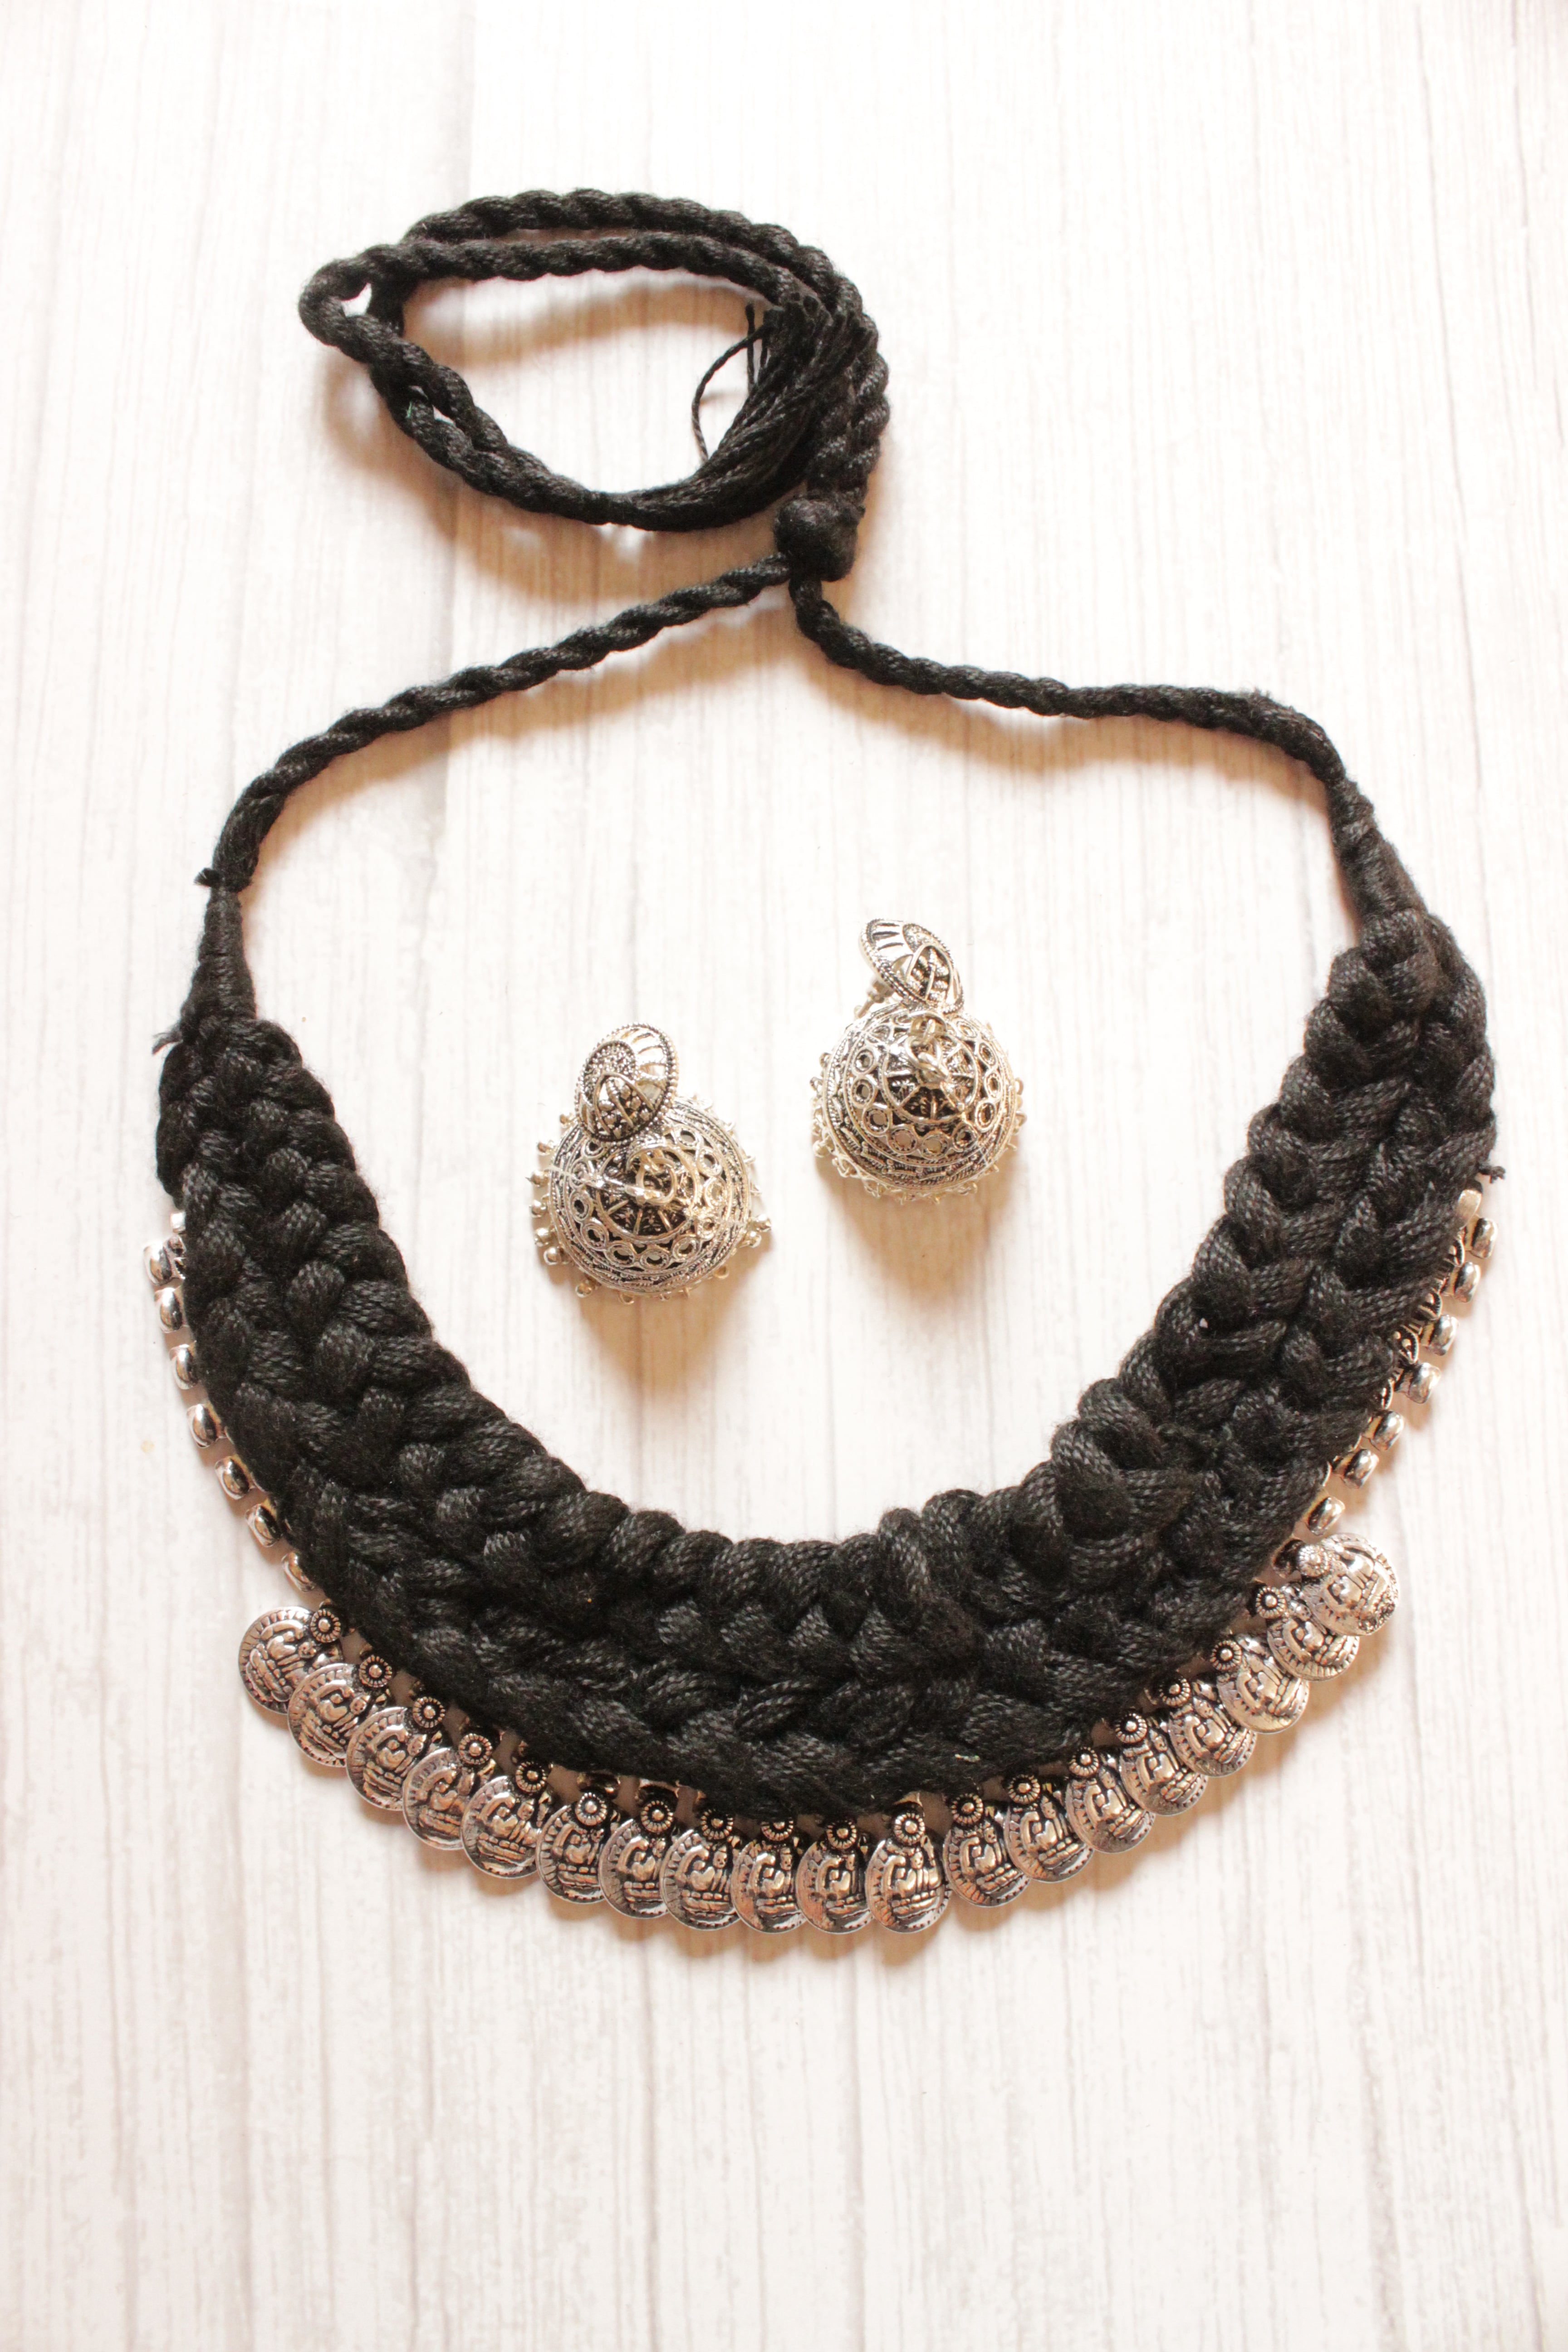 Black Thread Braided Coin Embellishments Choker Necklace Set with Jhumka Earrings